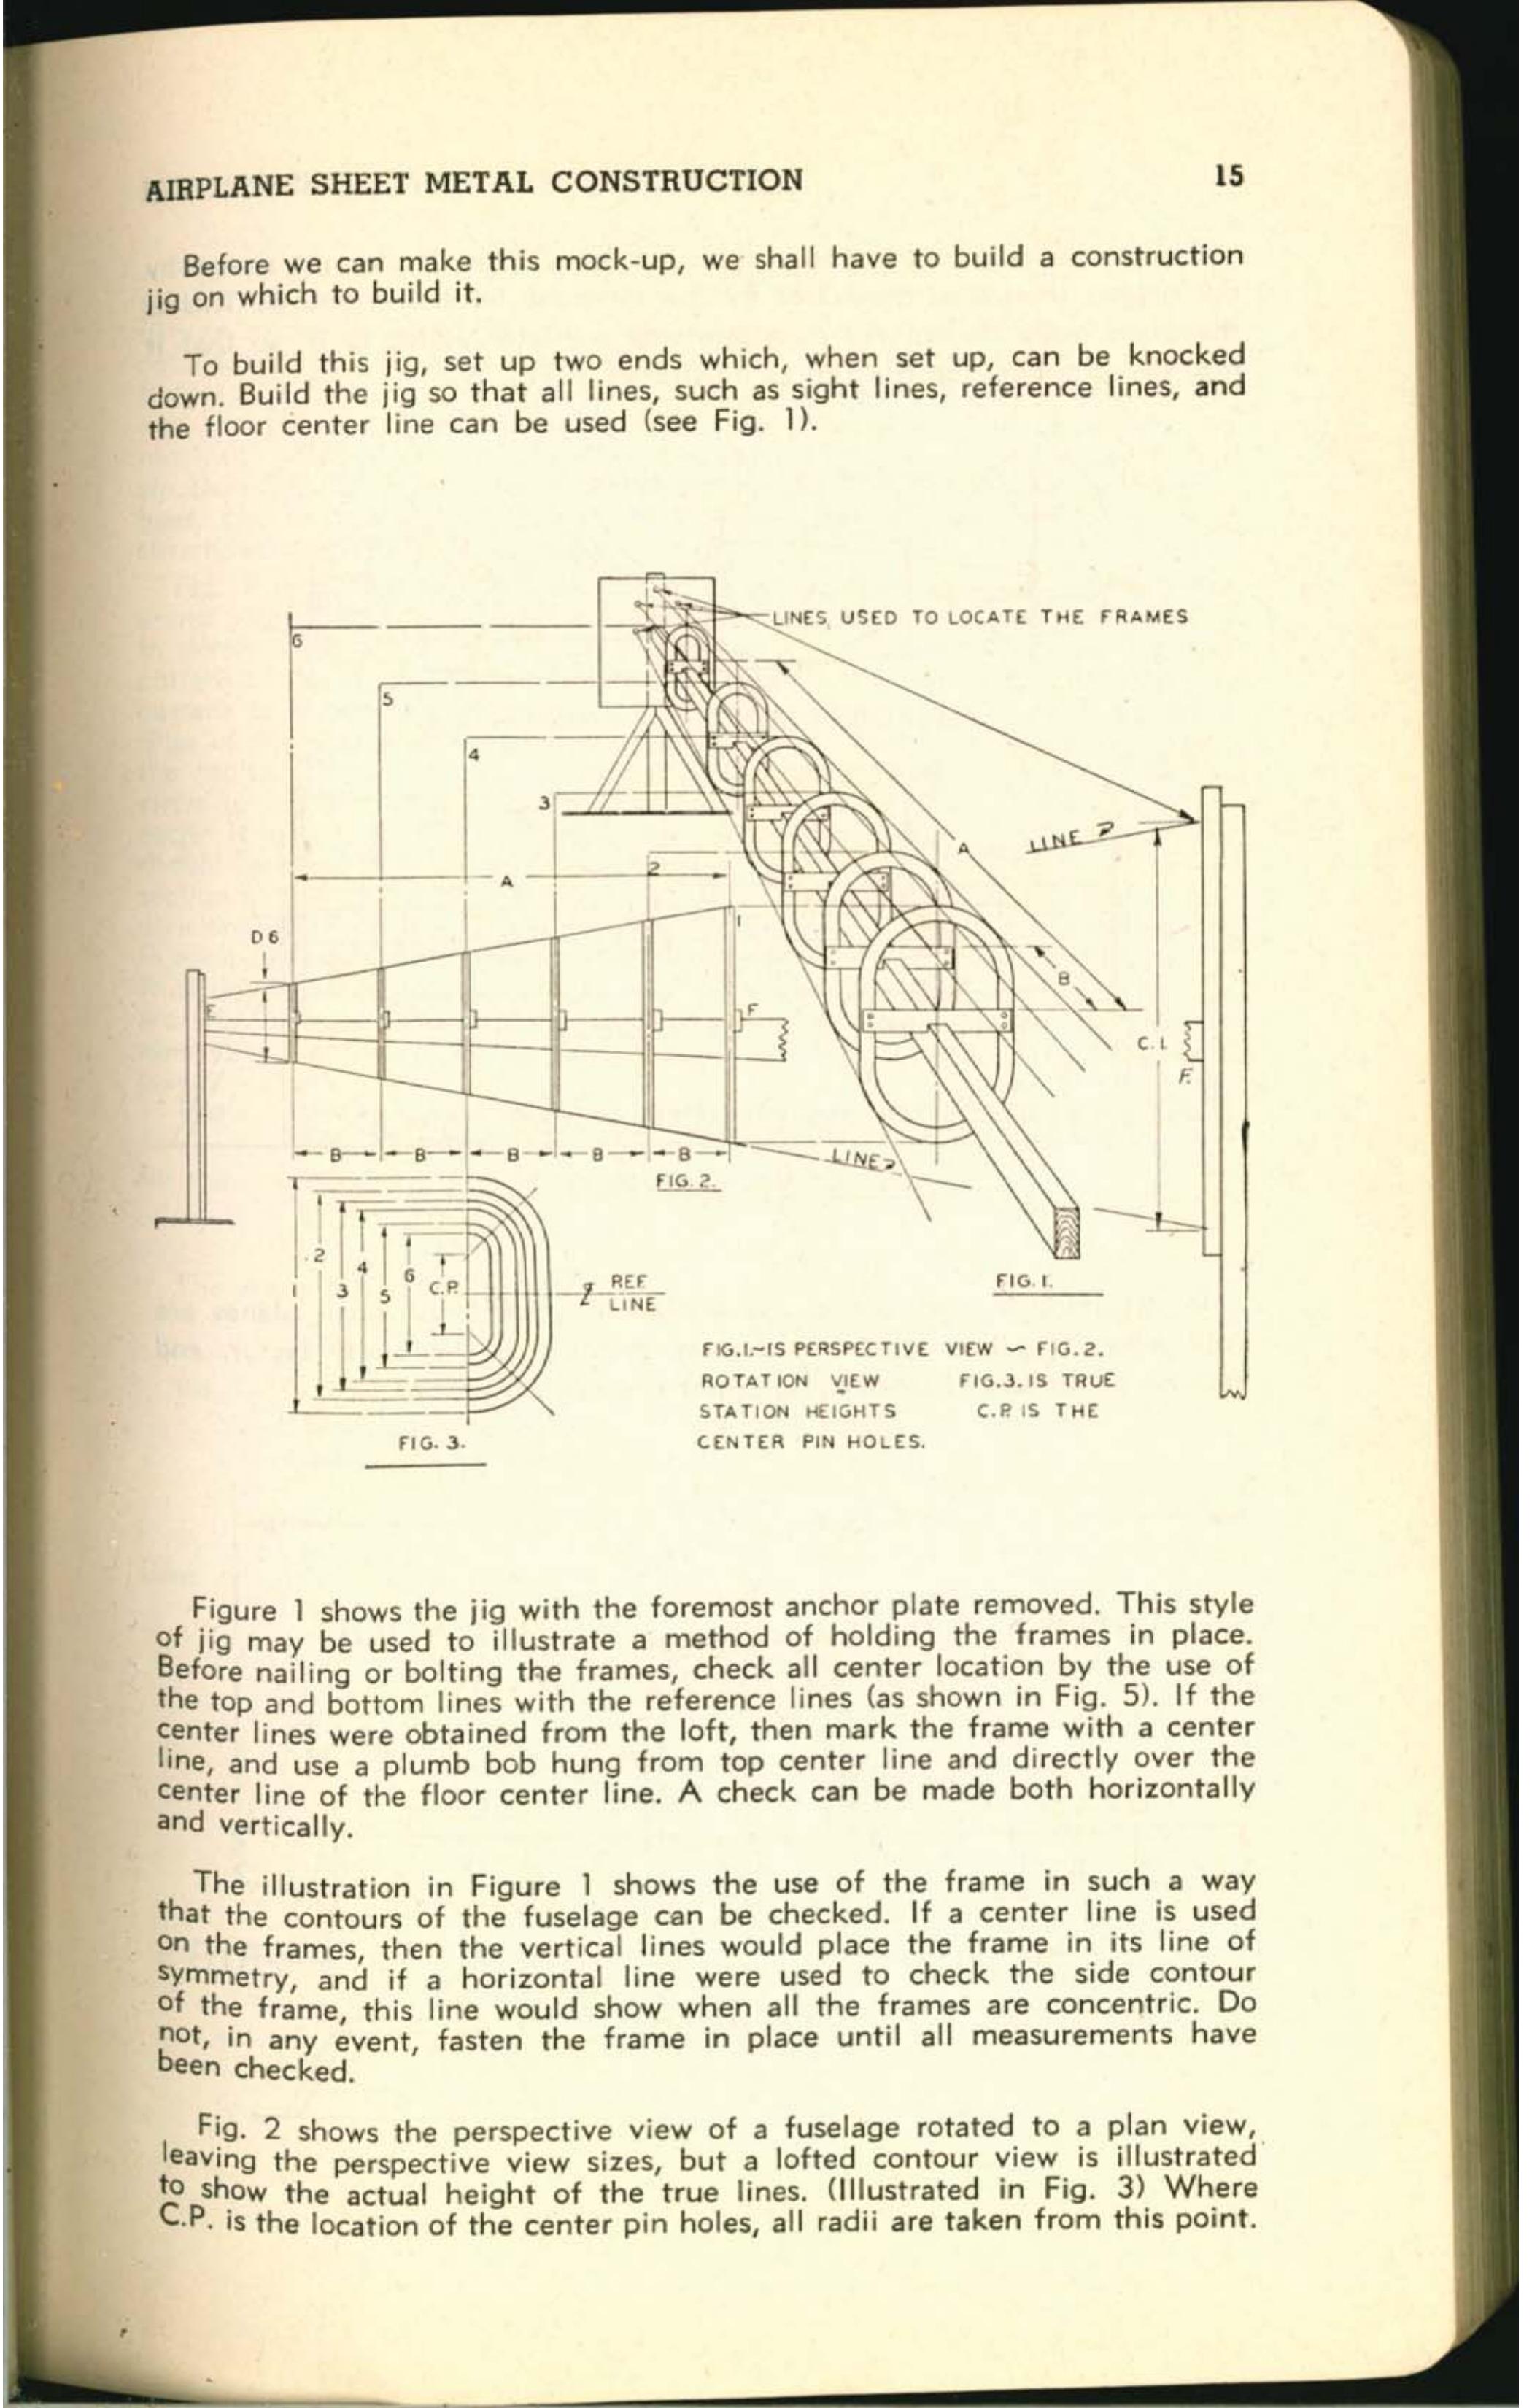 Sample page 29 from AirCorps Library document: Airplane Sheet Metal Construction Book 1